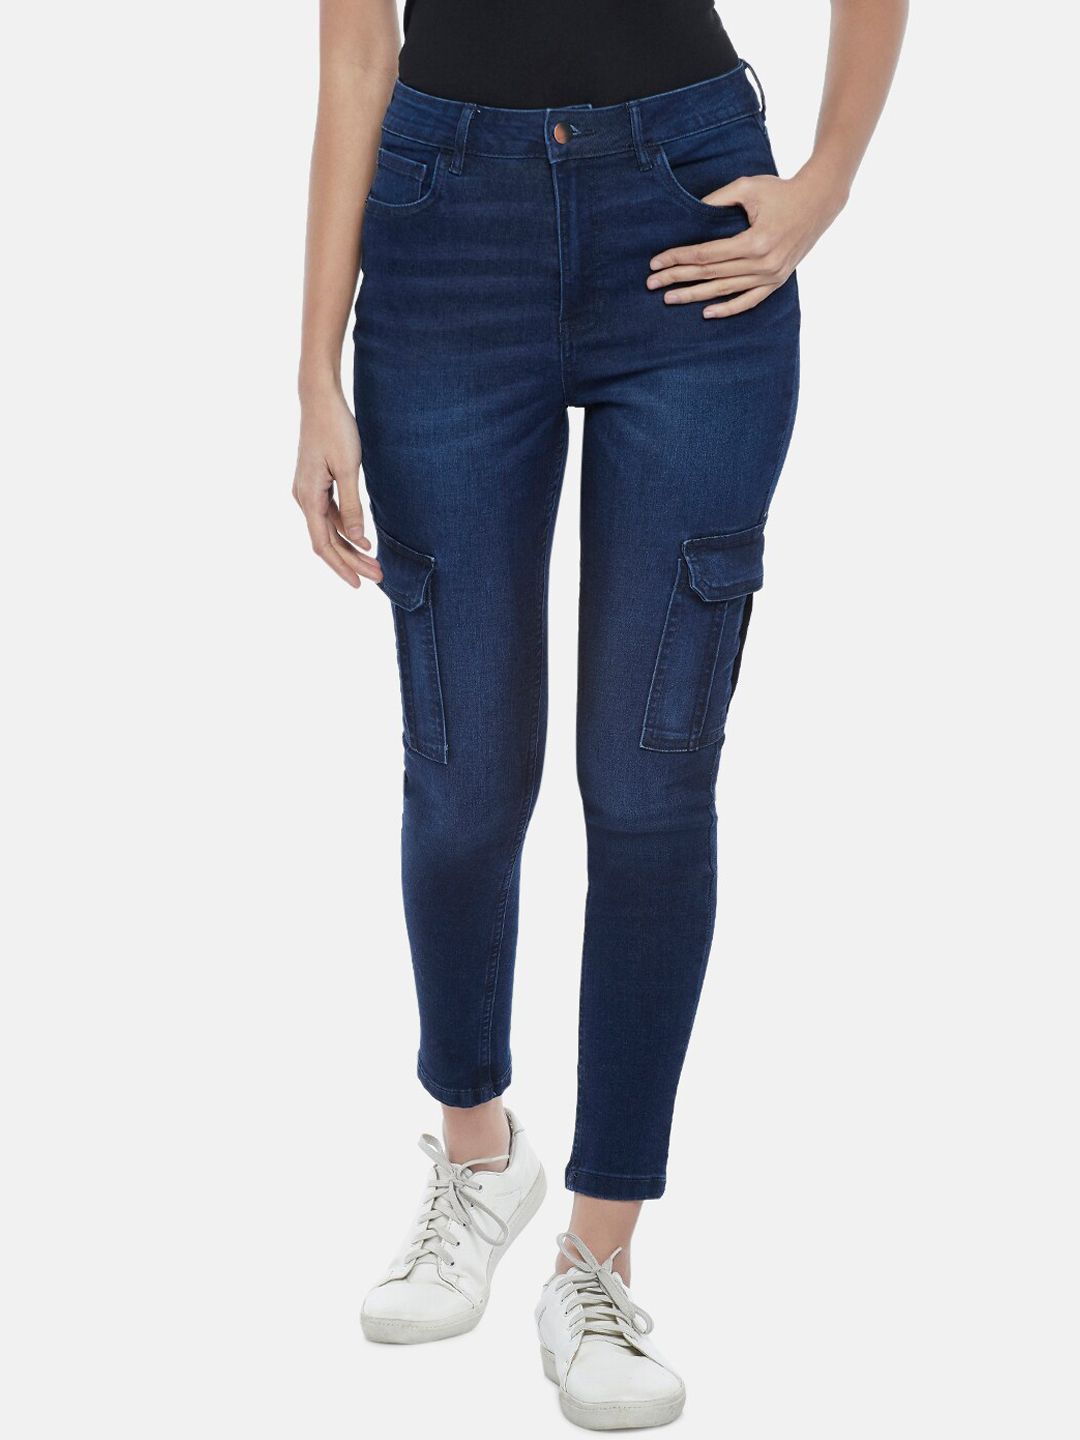 SF JEANS by Pantaloons Women Blue Skinny Fit High-Rise Jeans Price in India